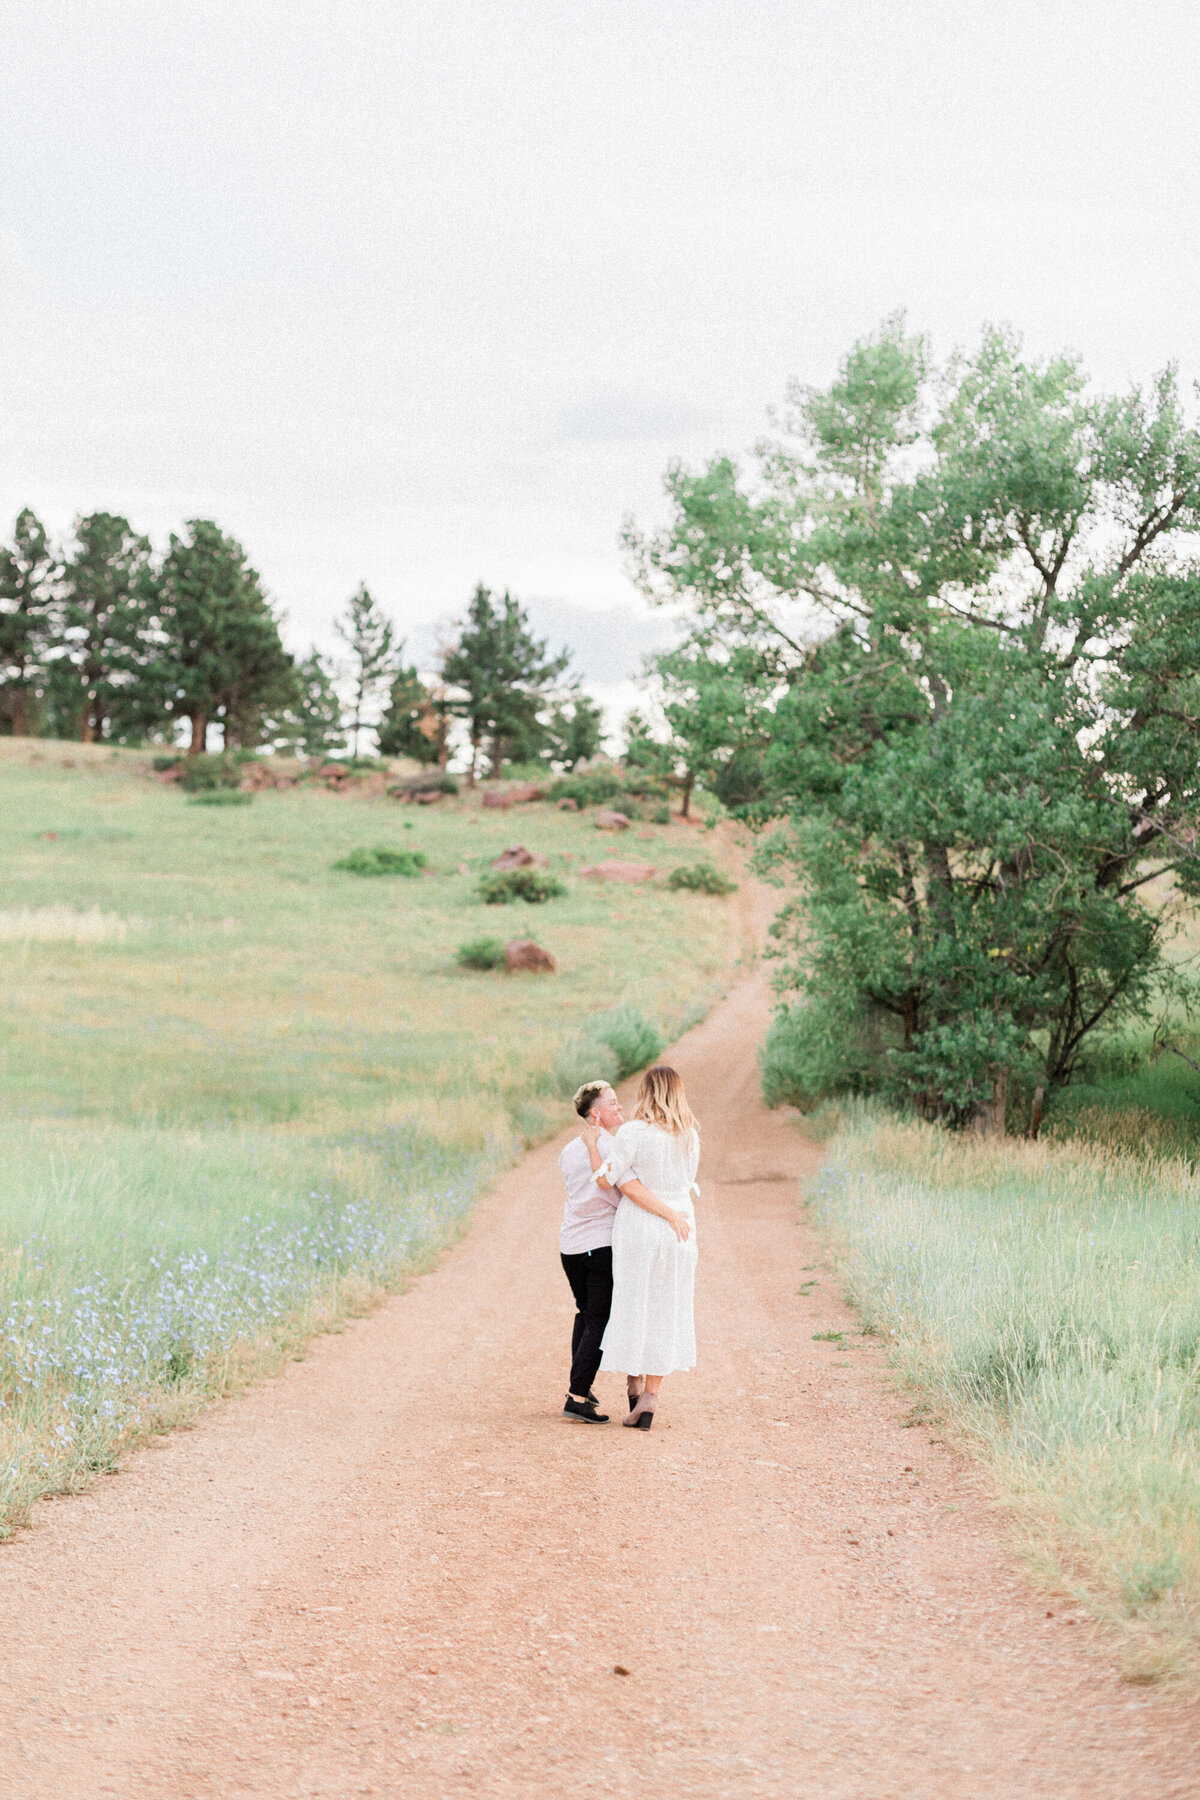 Sunrise_Engagement_Session_Boulder_Coulter_Lgbtq_by_Colorado_Wedding_Photographer_Diana_Coulter-22